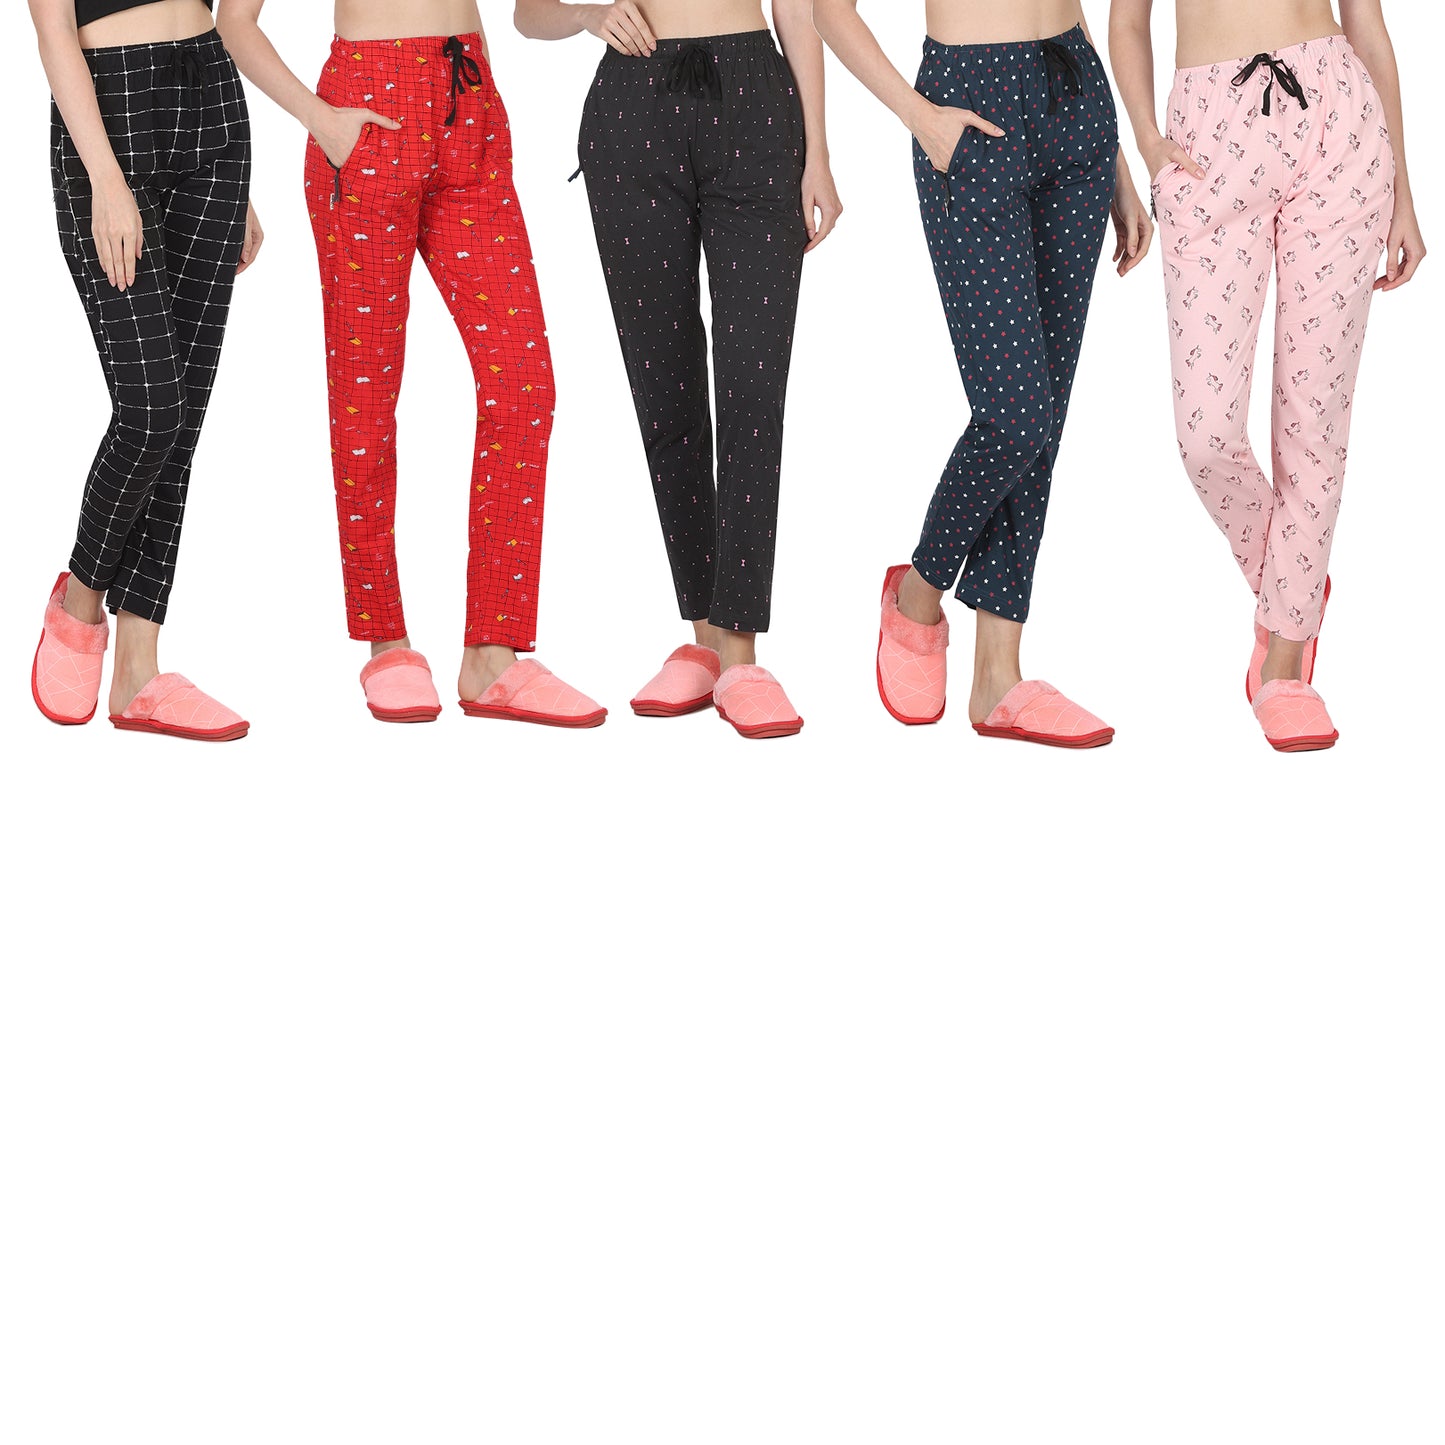 Eazy Women's Printed Lower - Pack of 5 - Black, Bright Red, Charcoal Grey, Pine Green & Light Pink